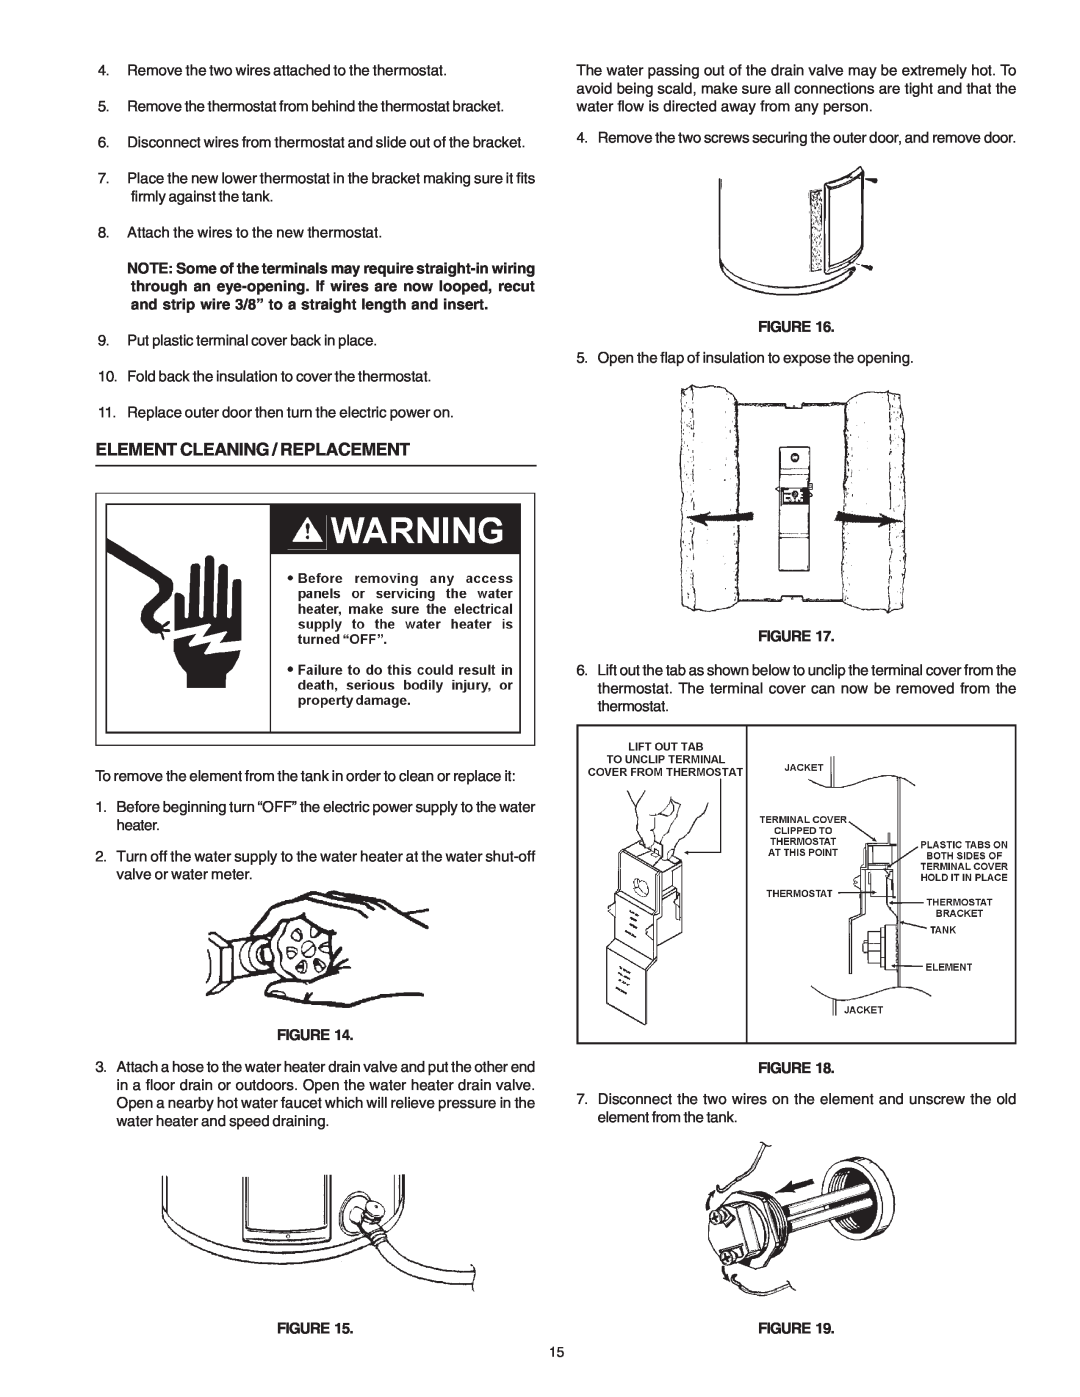 Reliance Water Heaters 184735-000 instruction manual Element Cleaning / Replacement 